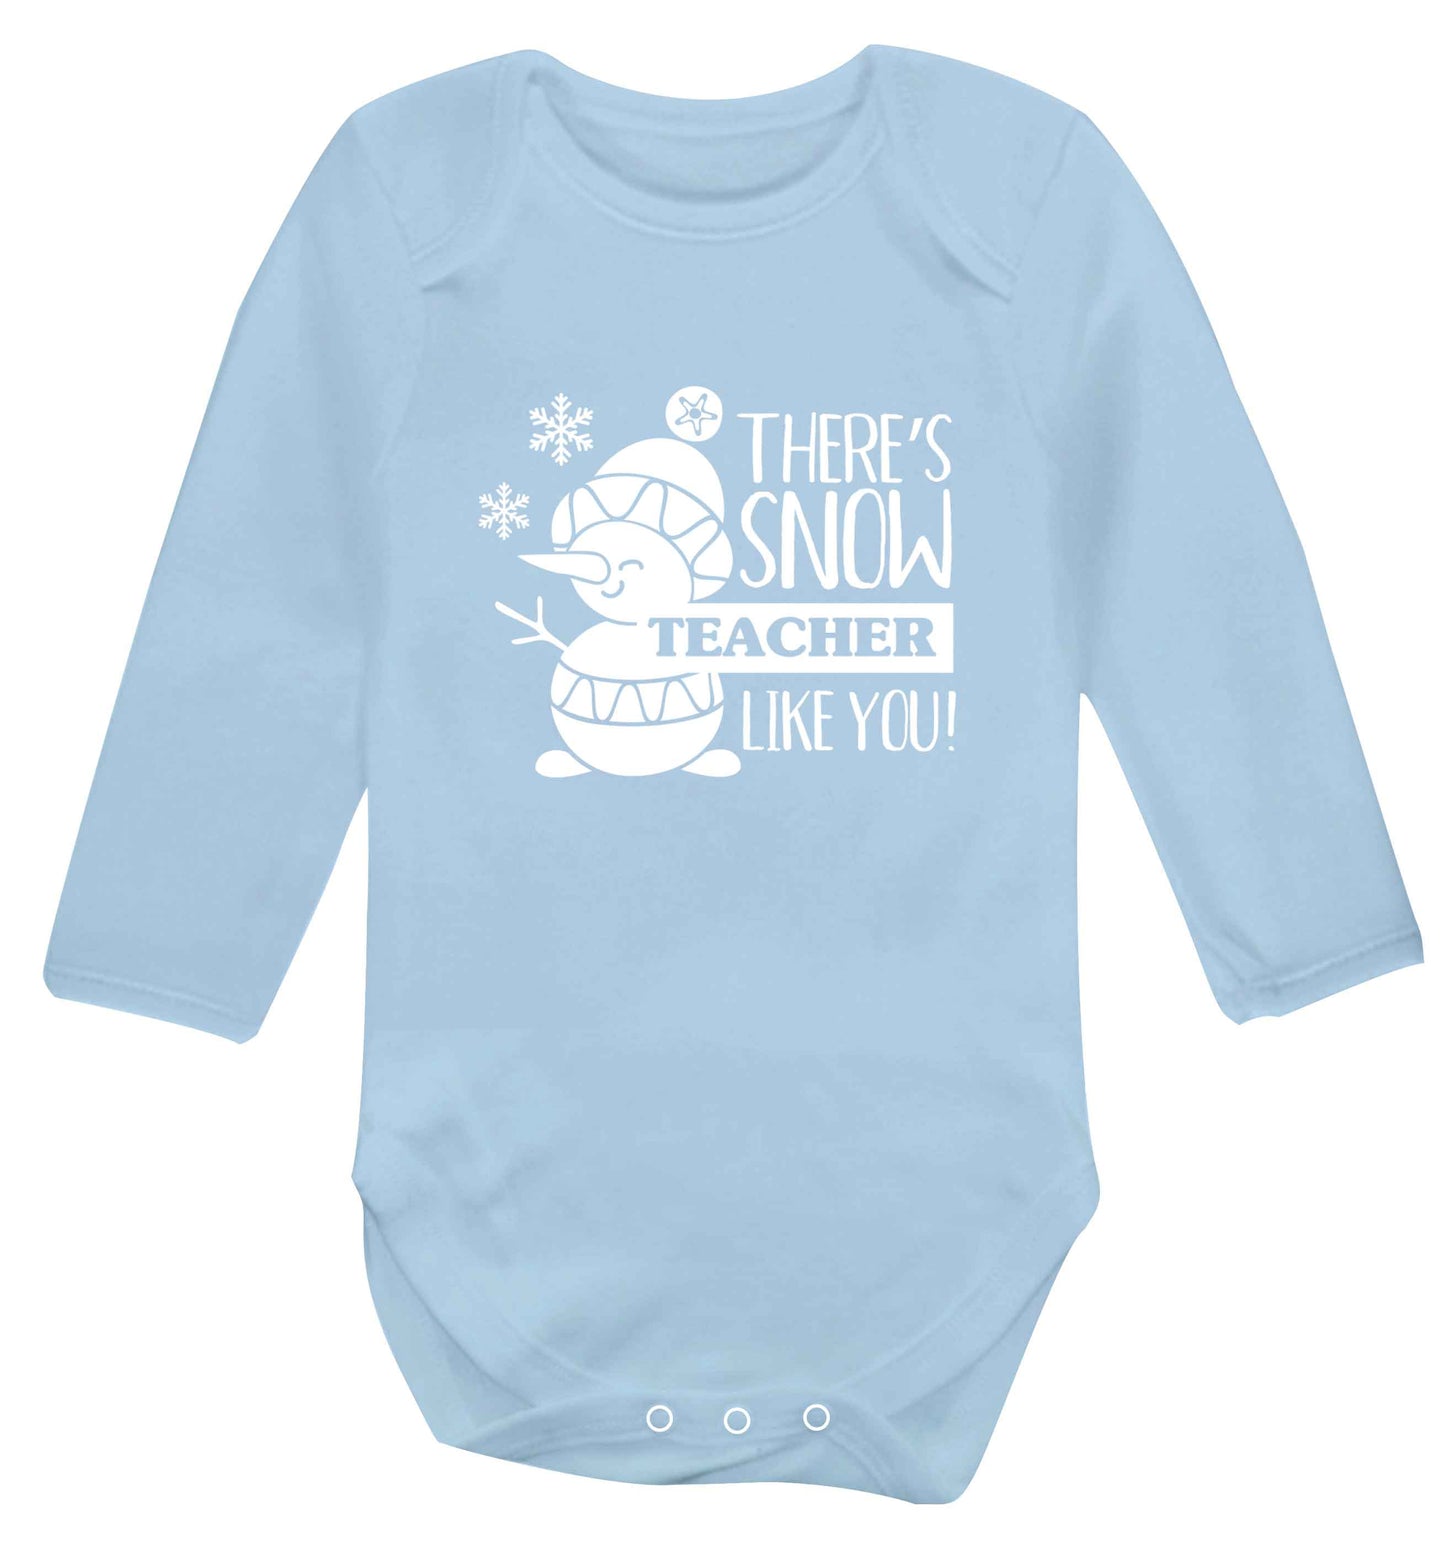 There's snow teacher like you baby vest long sleeved pale blue 6-12 months